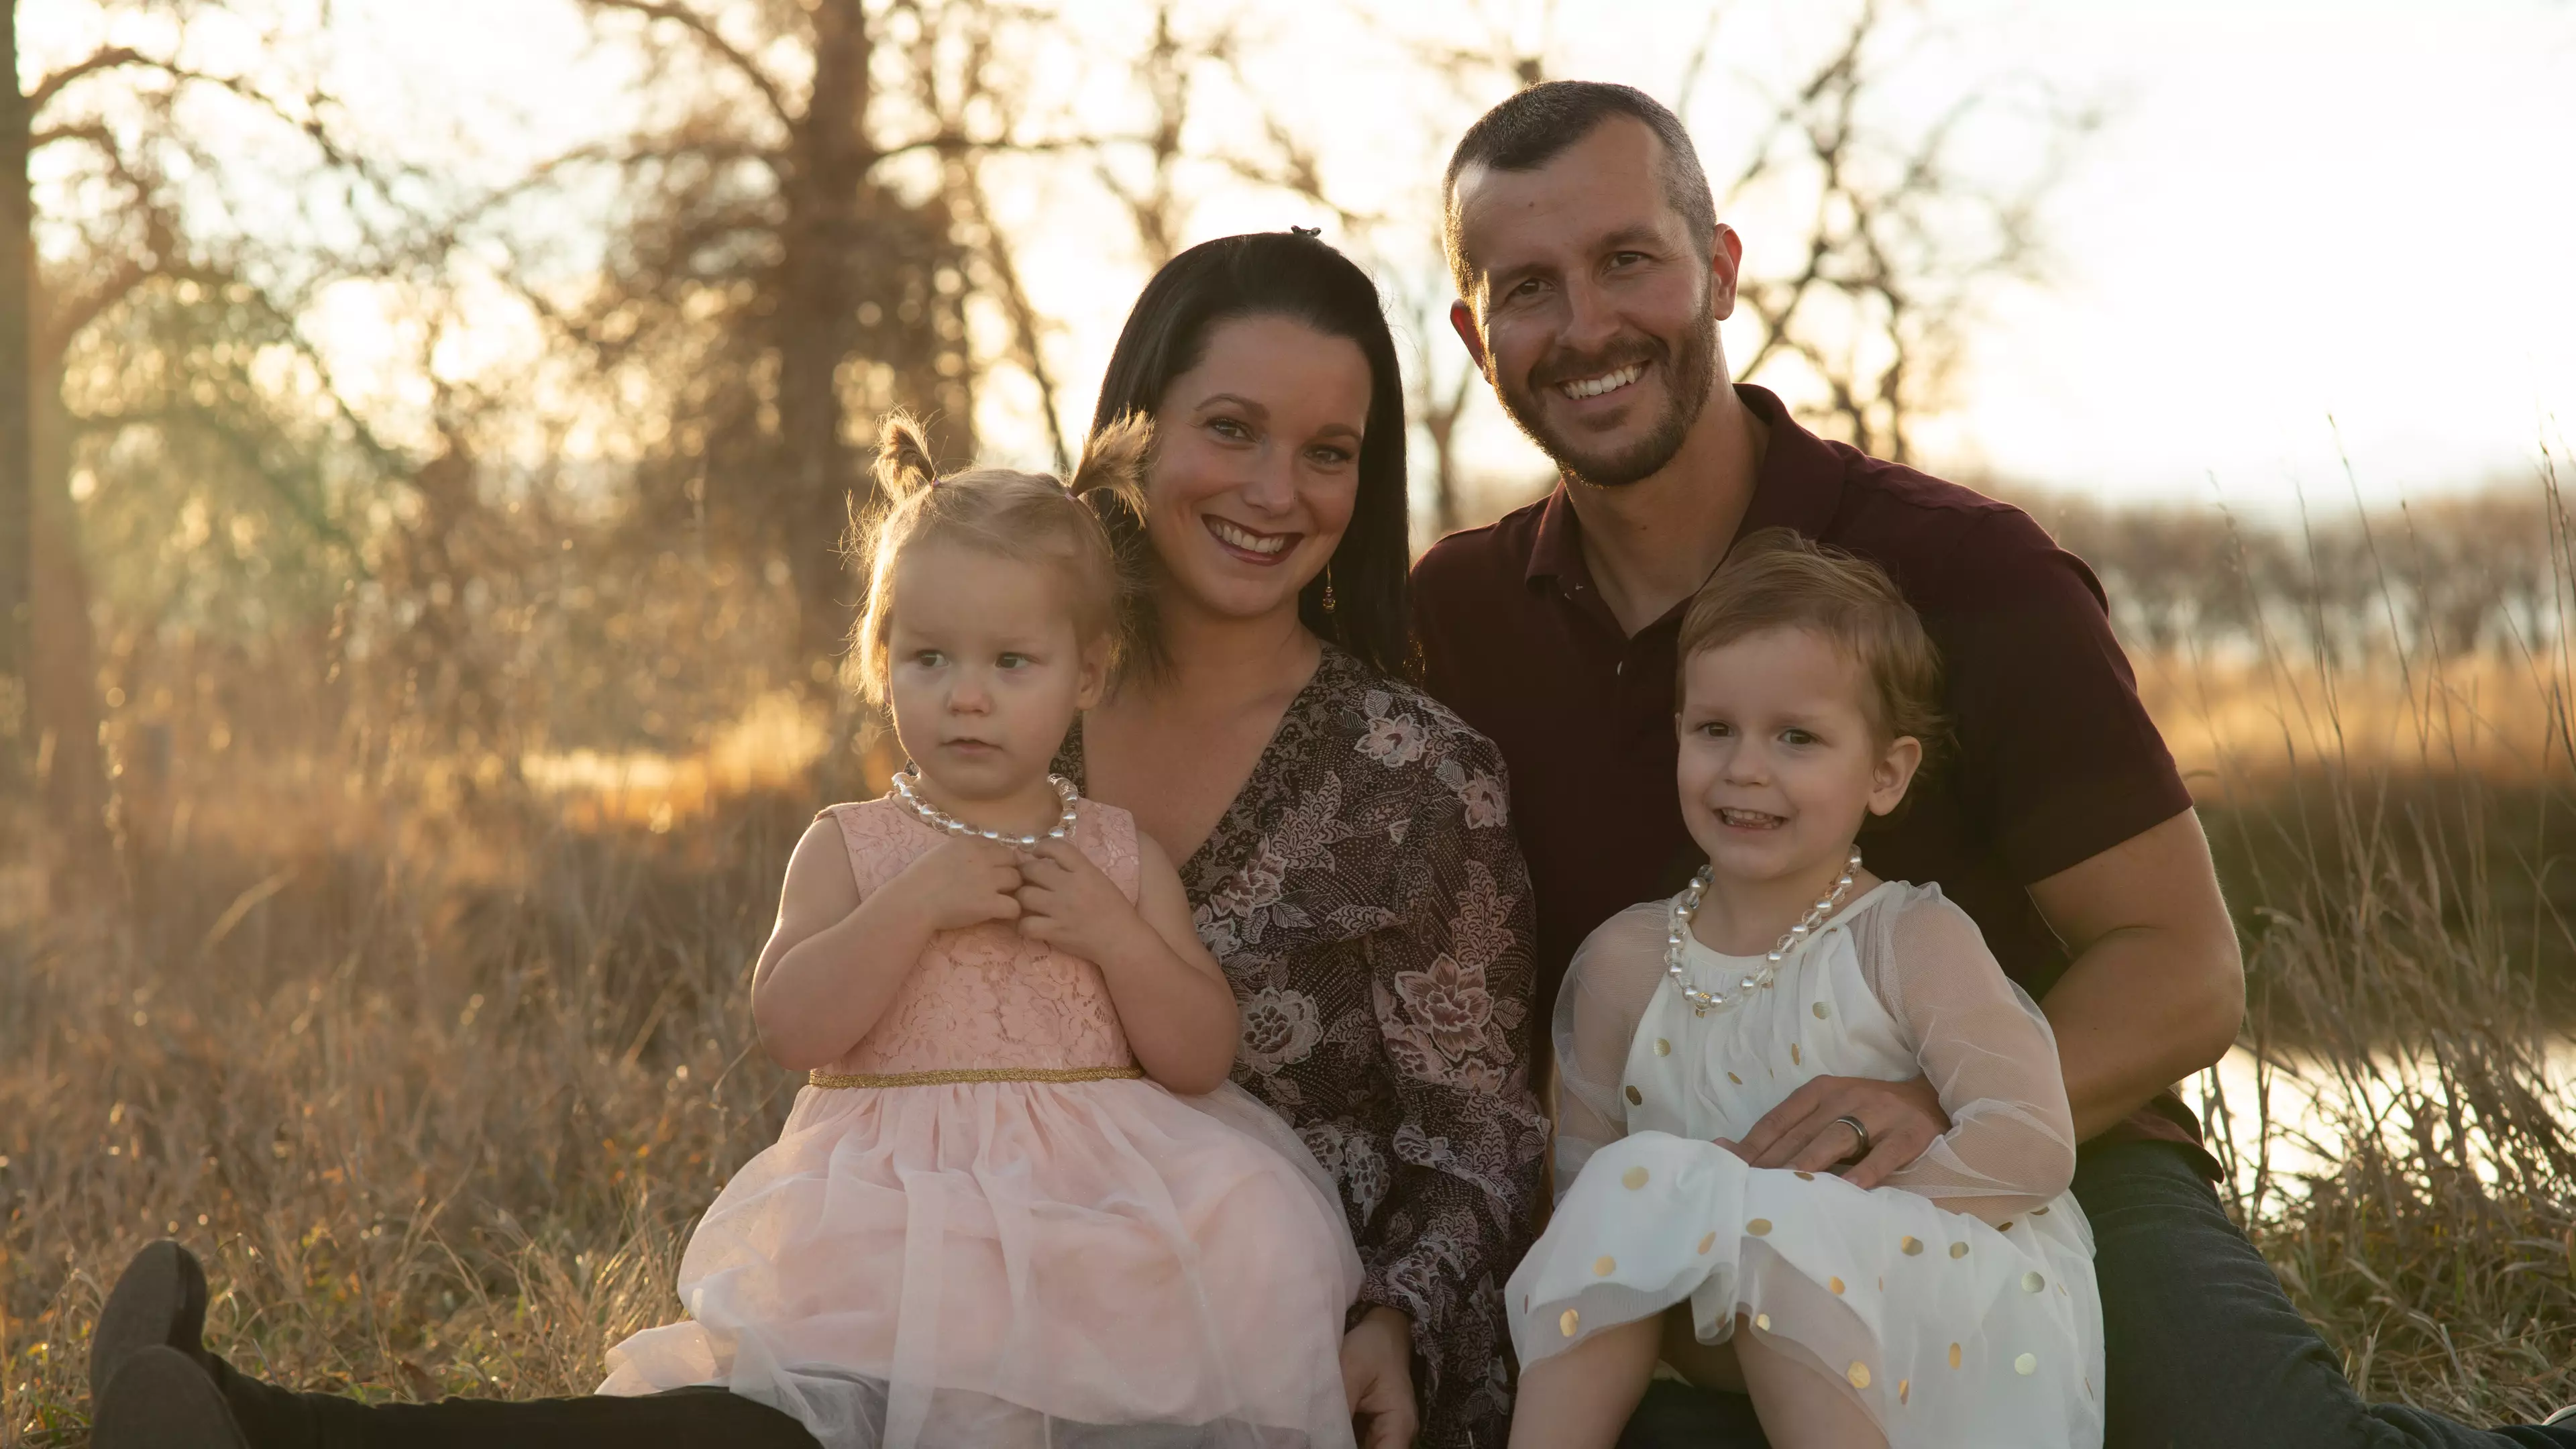 Chris Watts Was Ordered To Pay For Funeral Costs Of Victims 